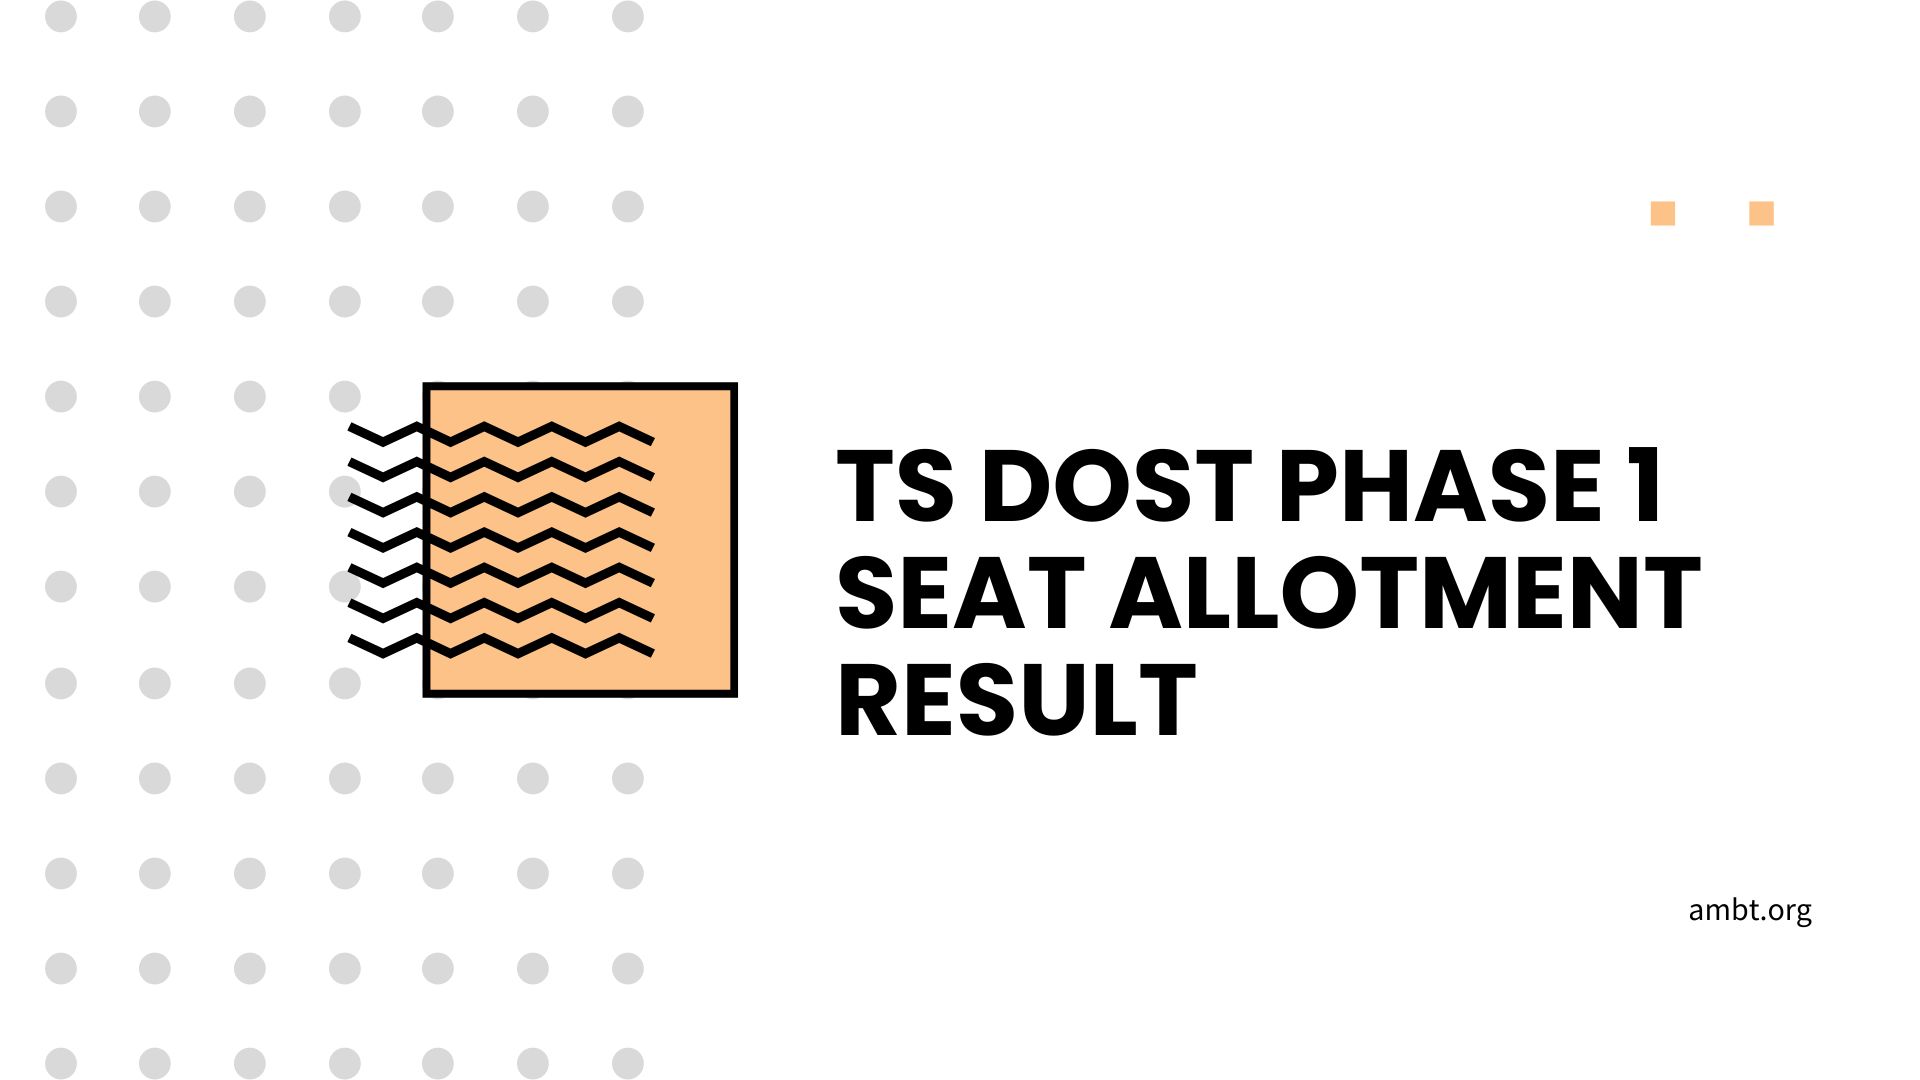 TS DOST Phase 1 Seat Allotment Result